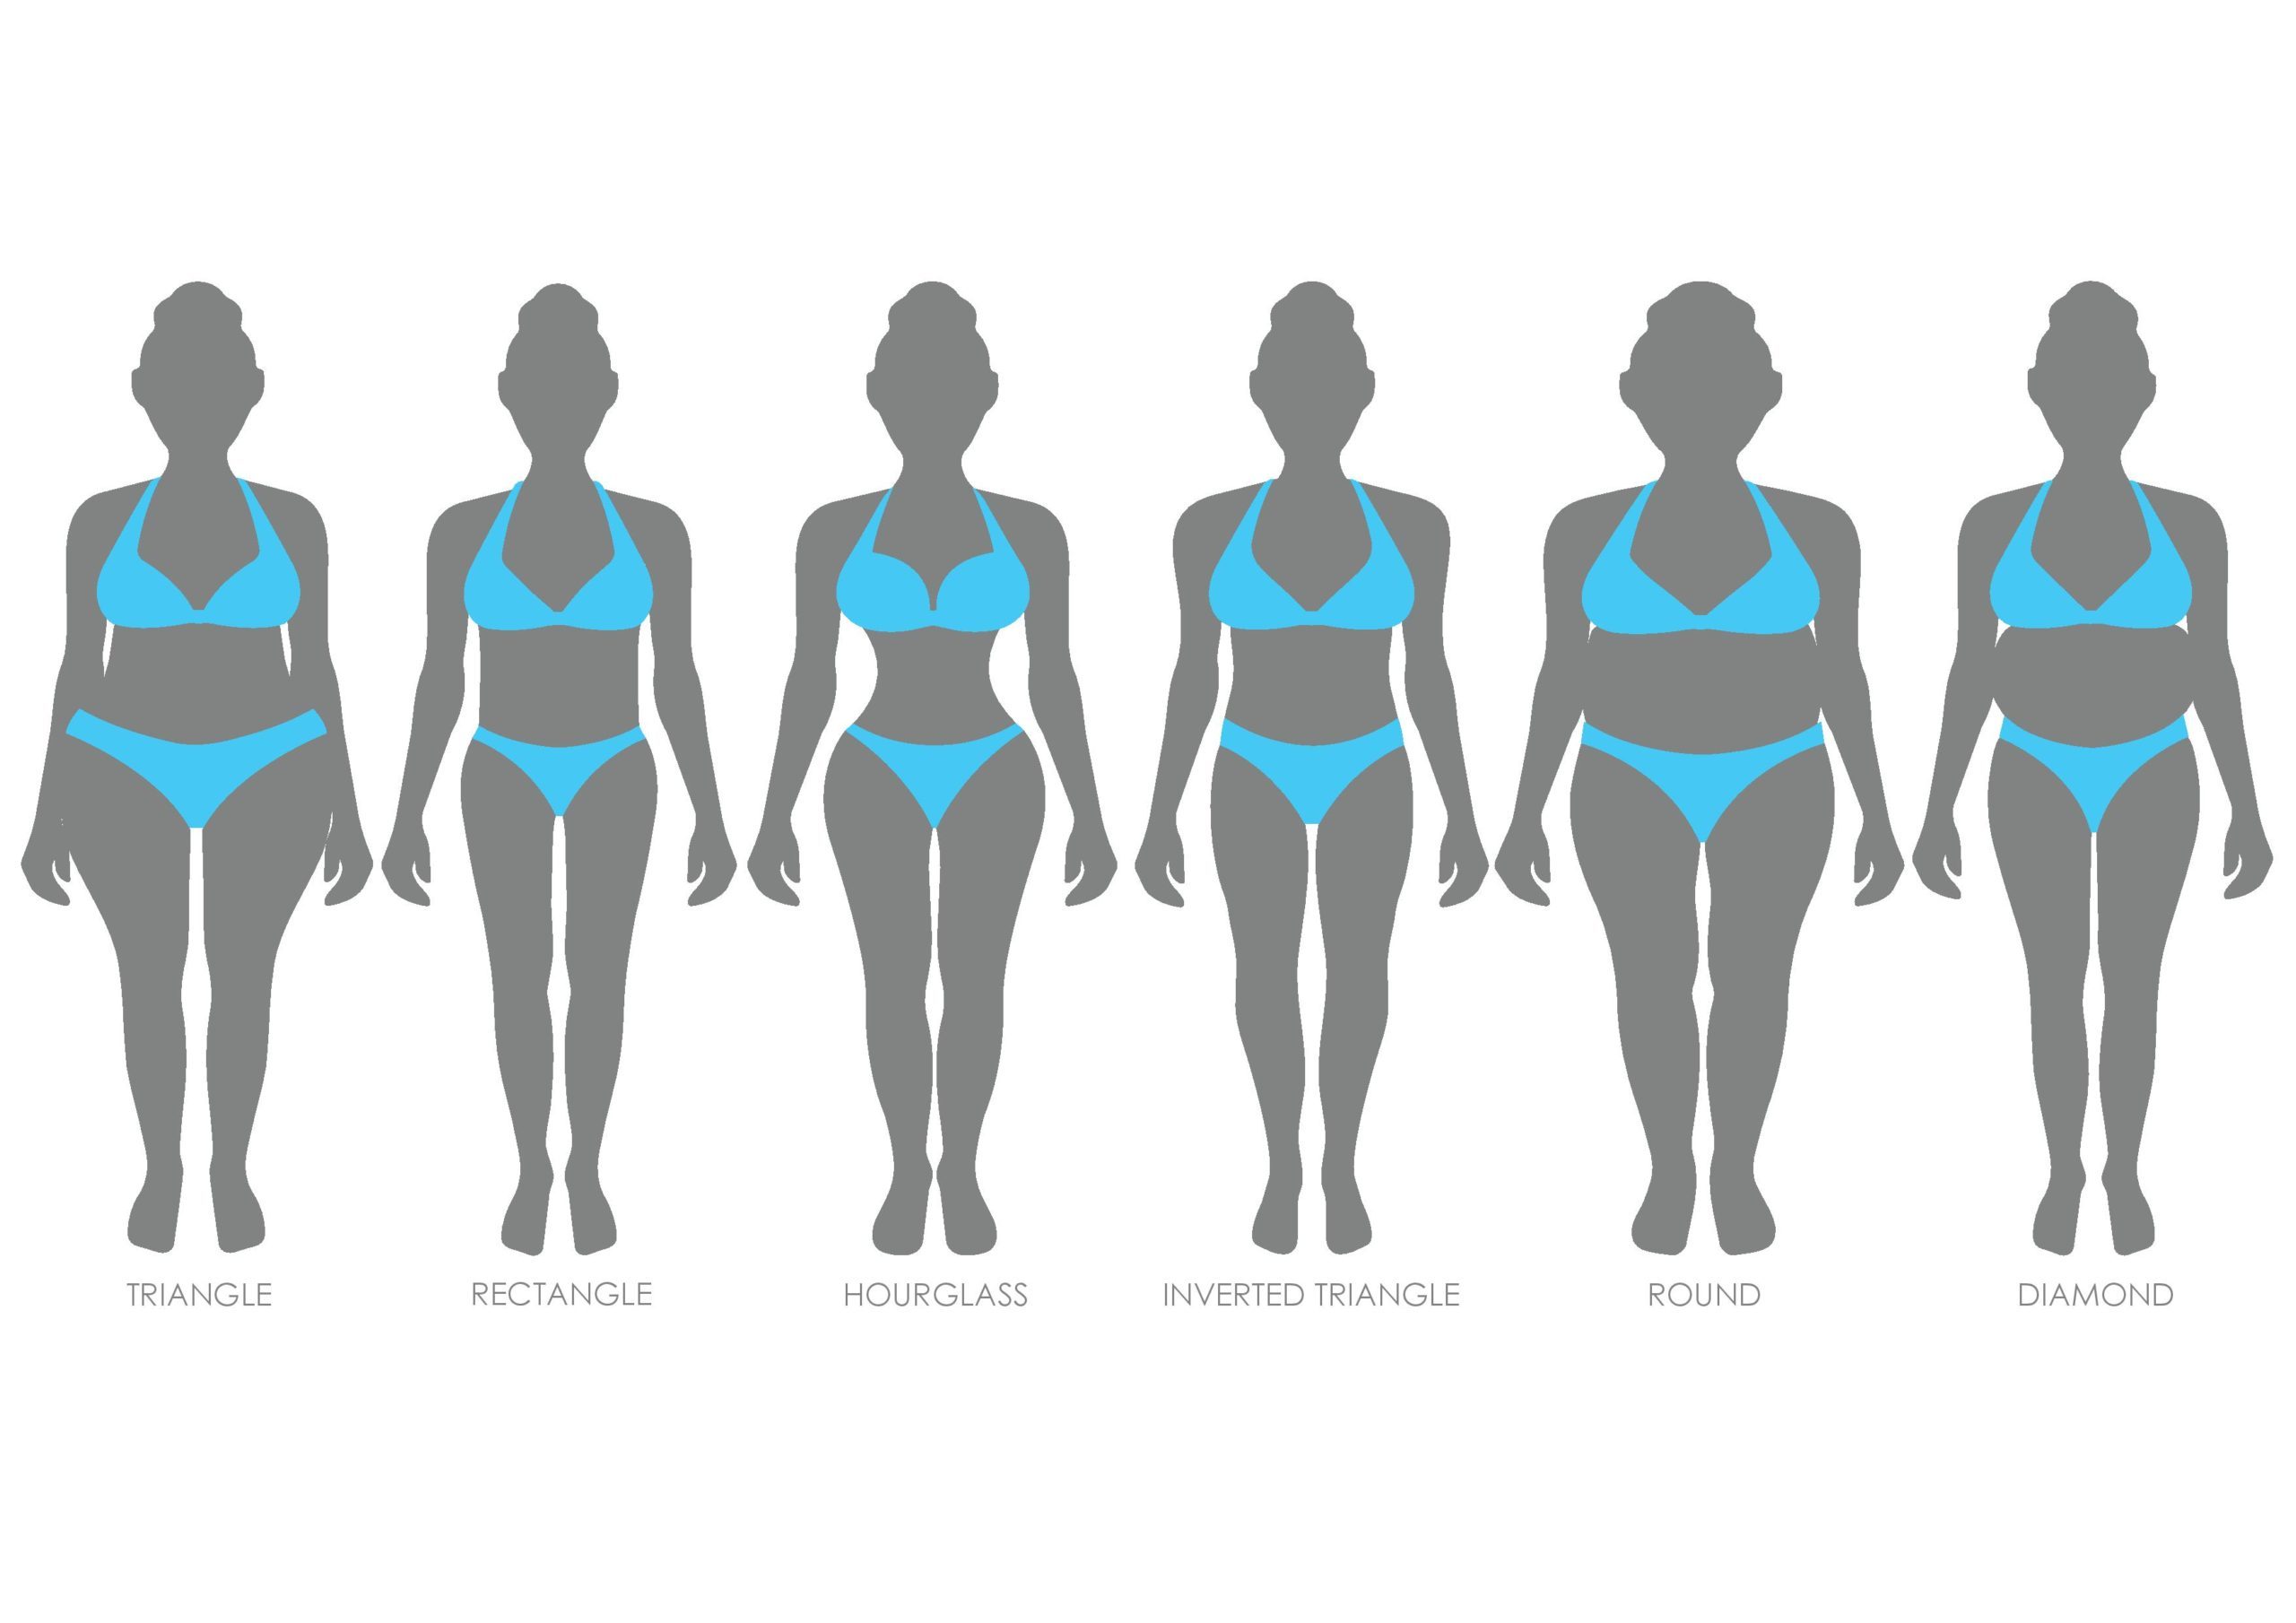 Which Body Shape Are You?